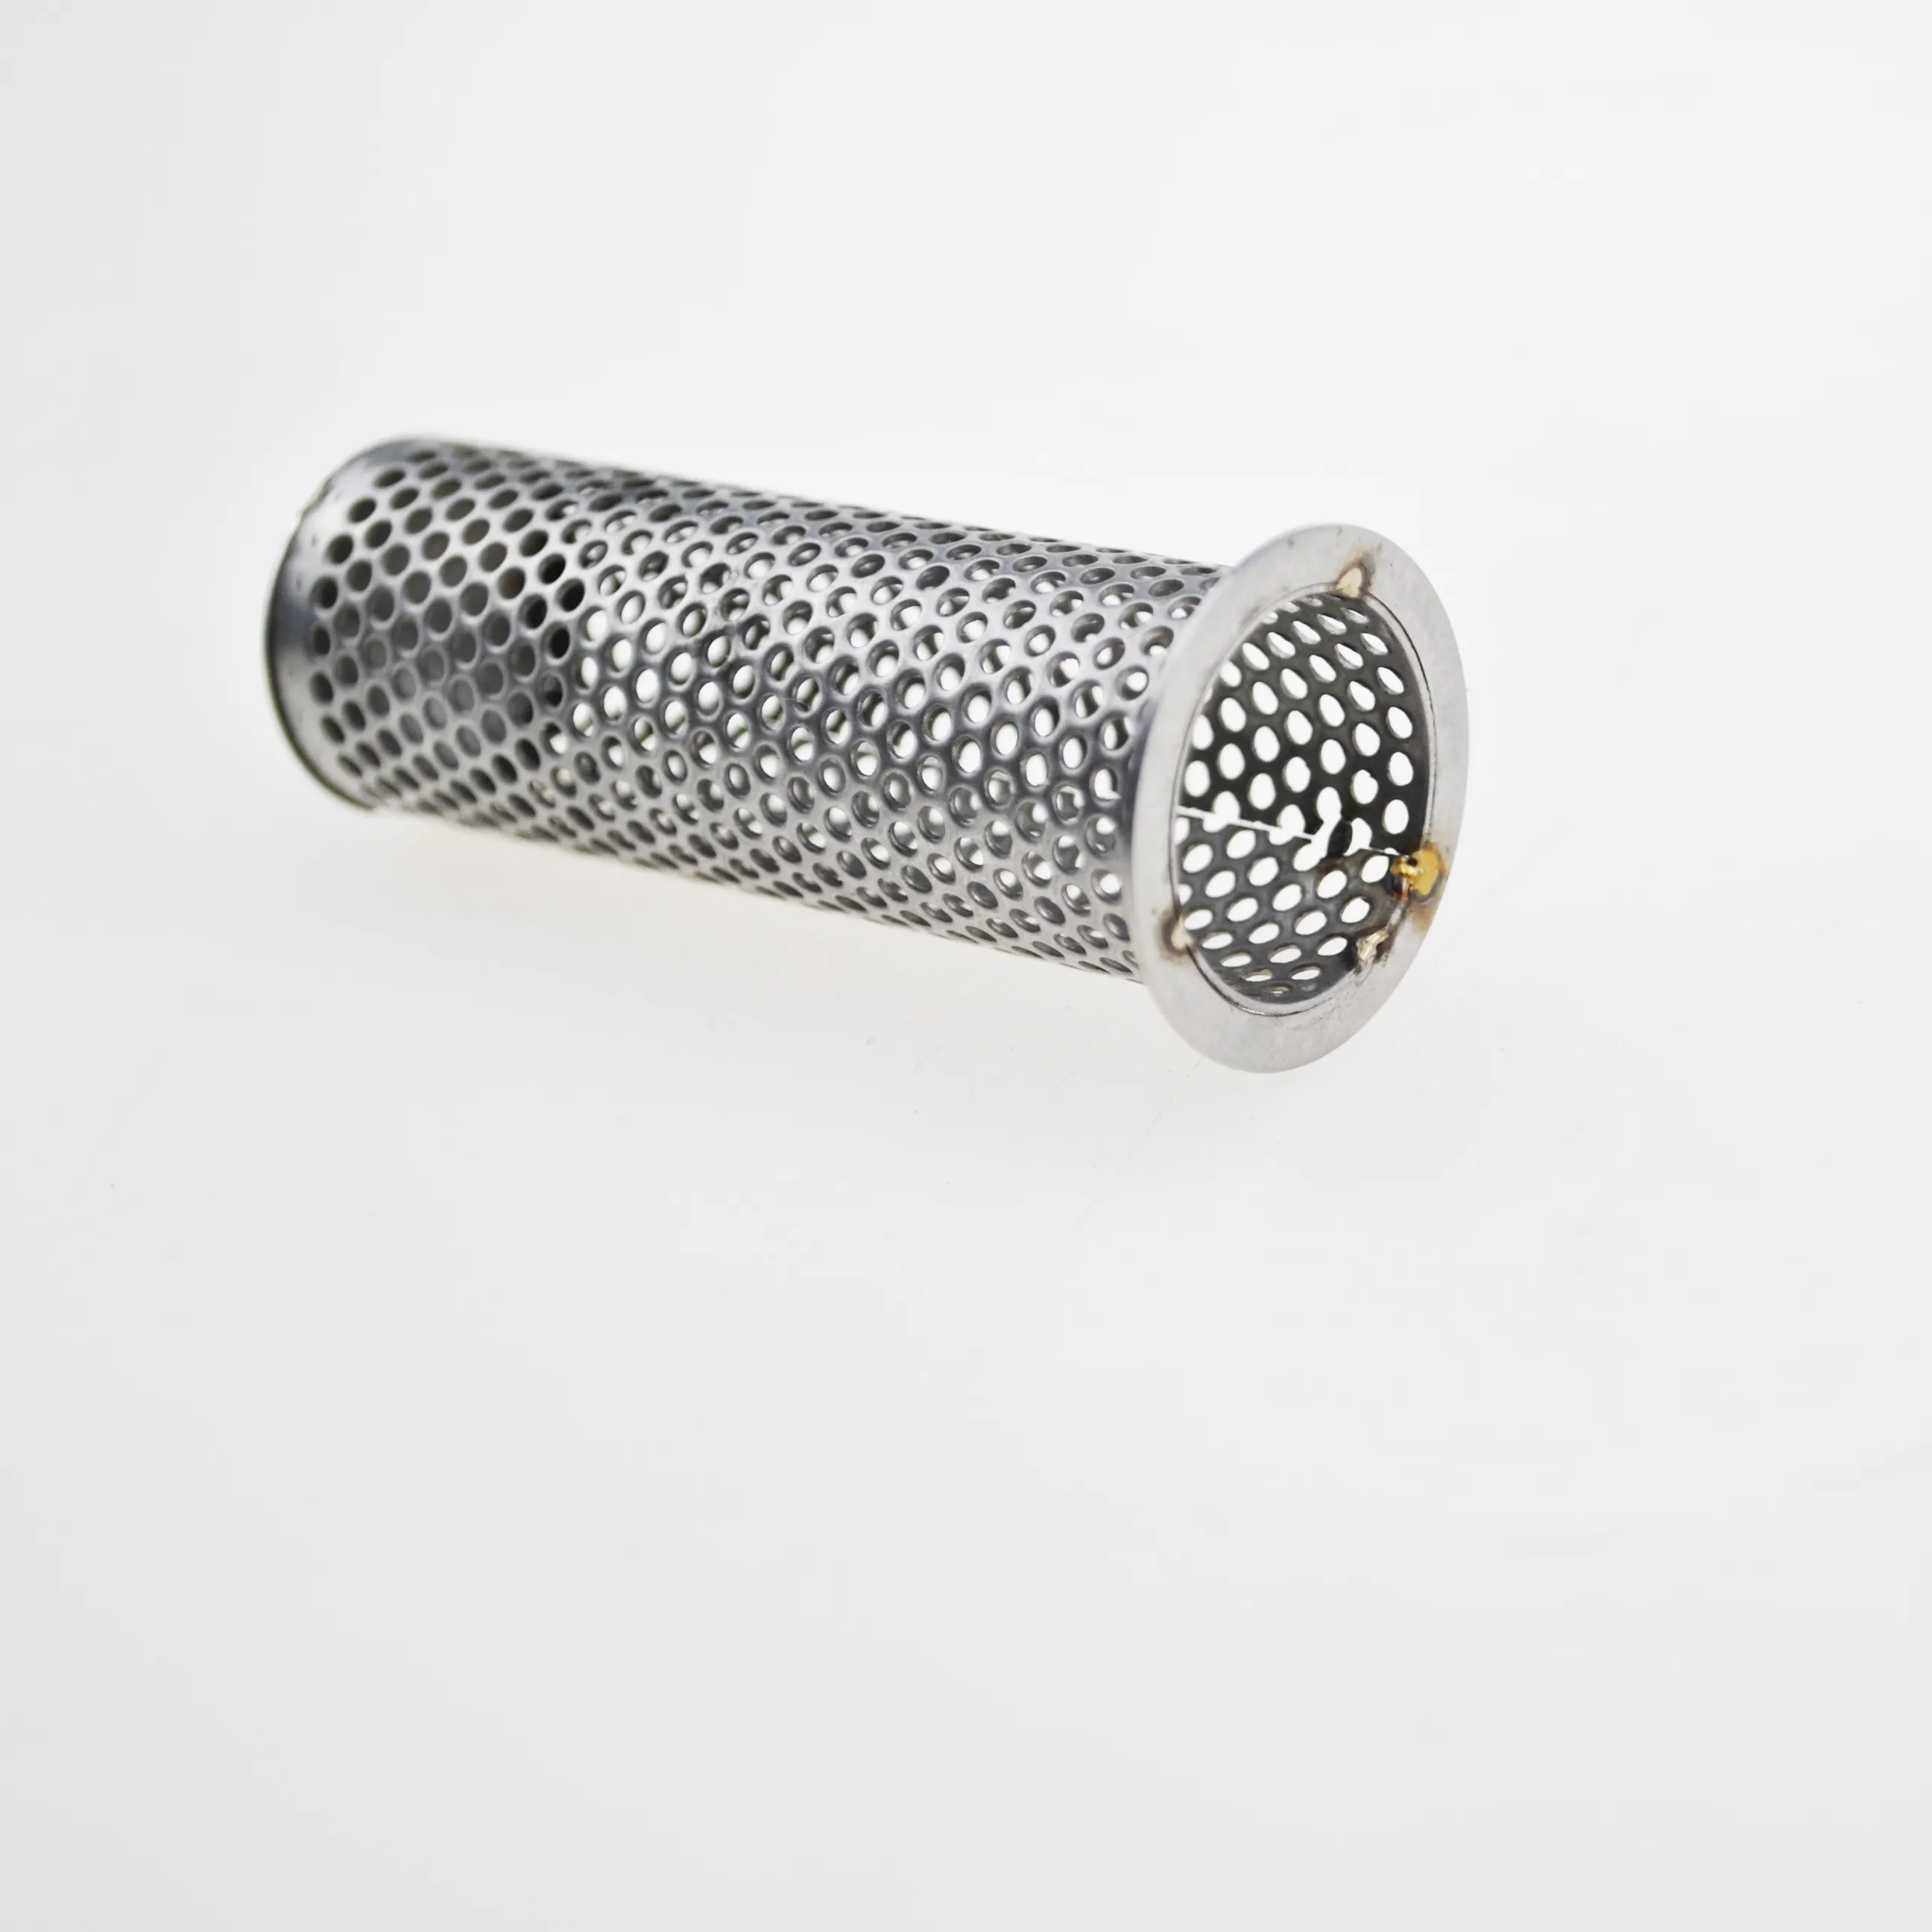 Precise filtration rate stainless steel perforated metal wire mesh filter tube / cartridge for petroleum and gas filtration